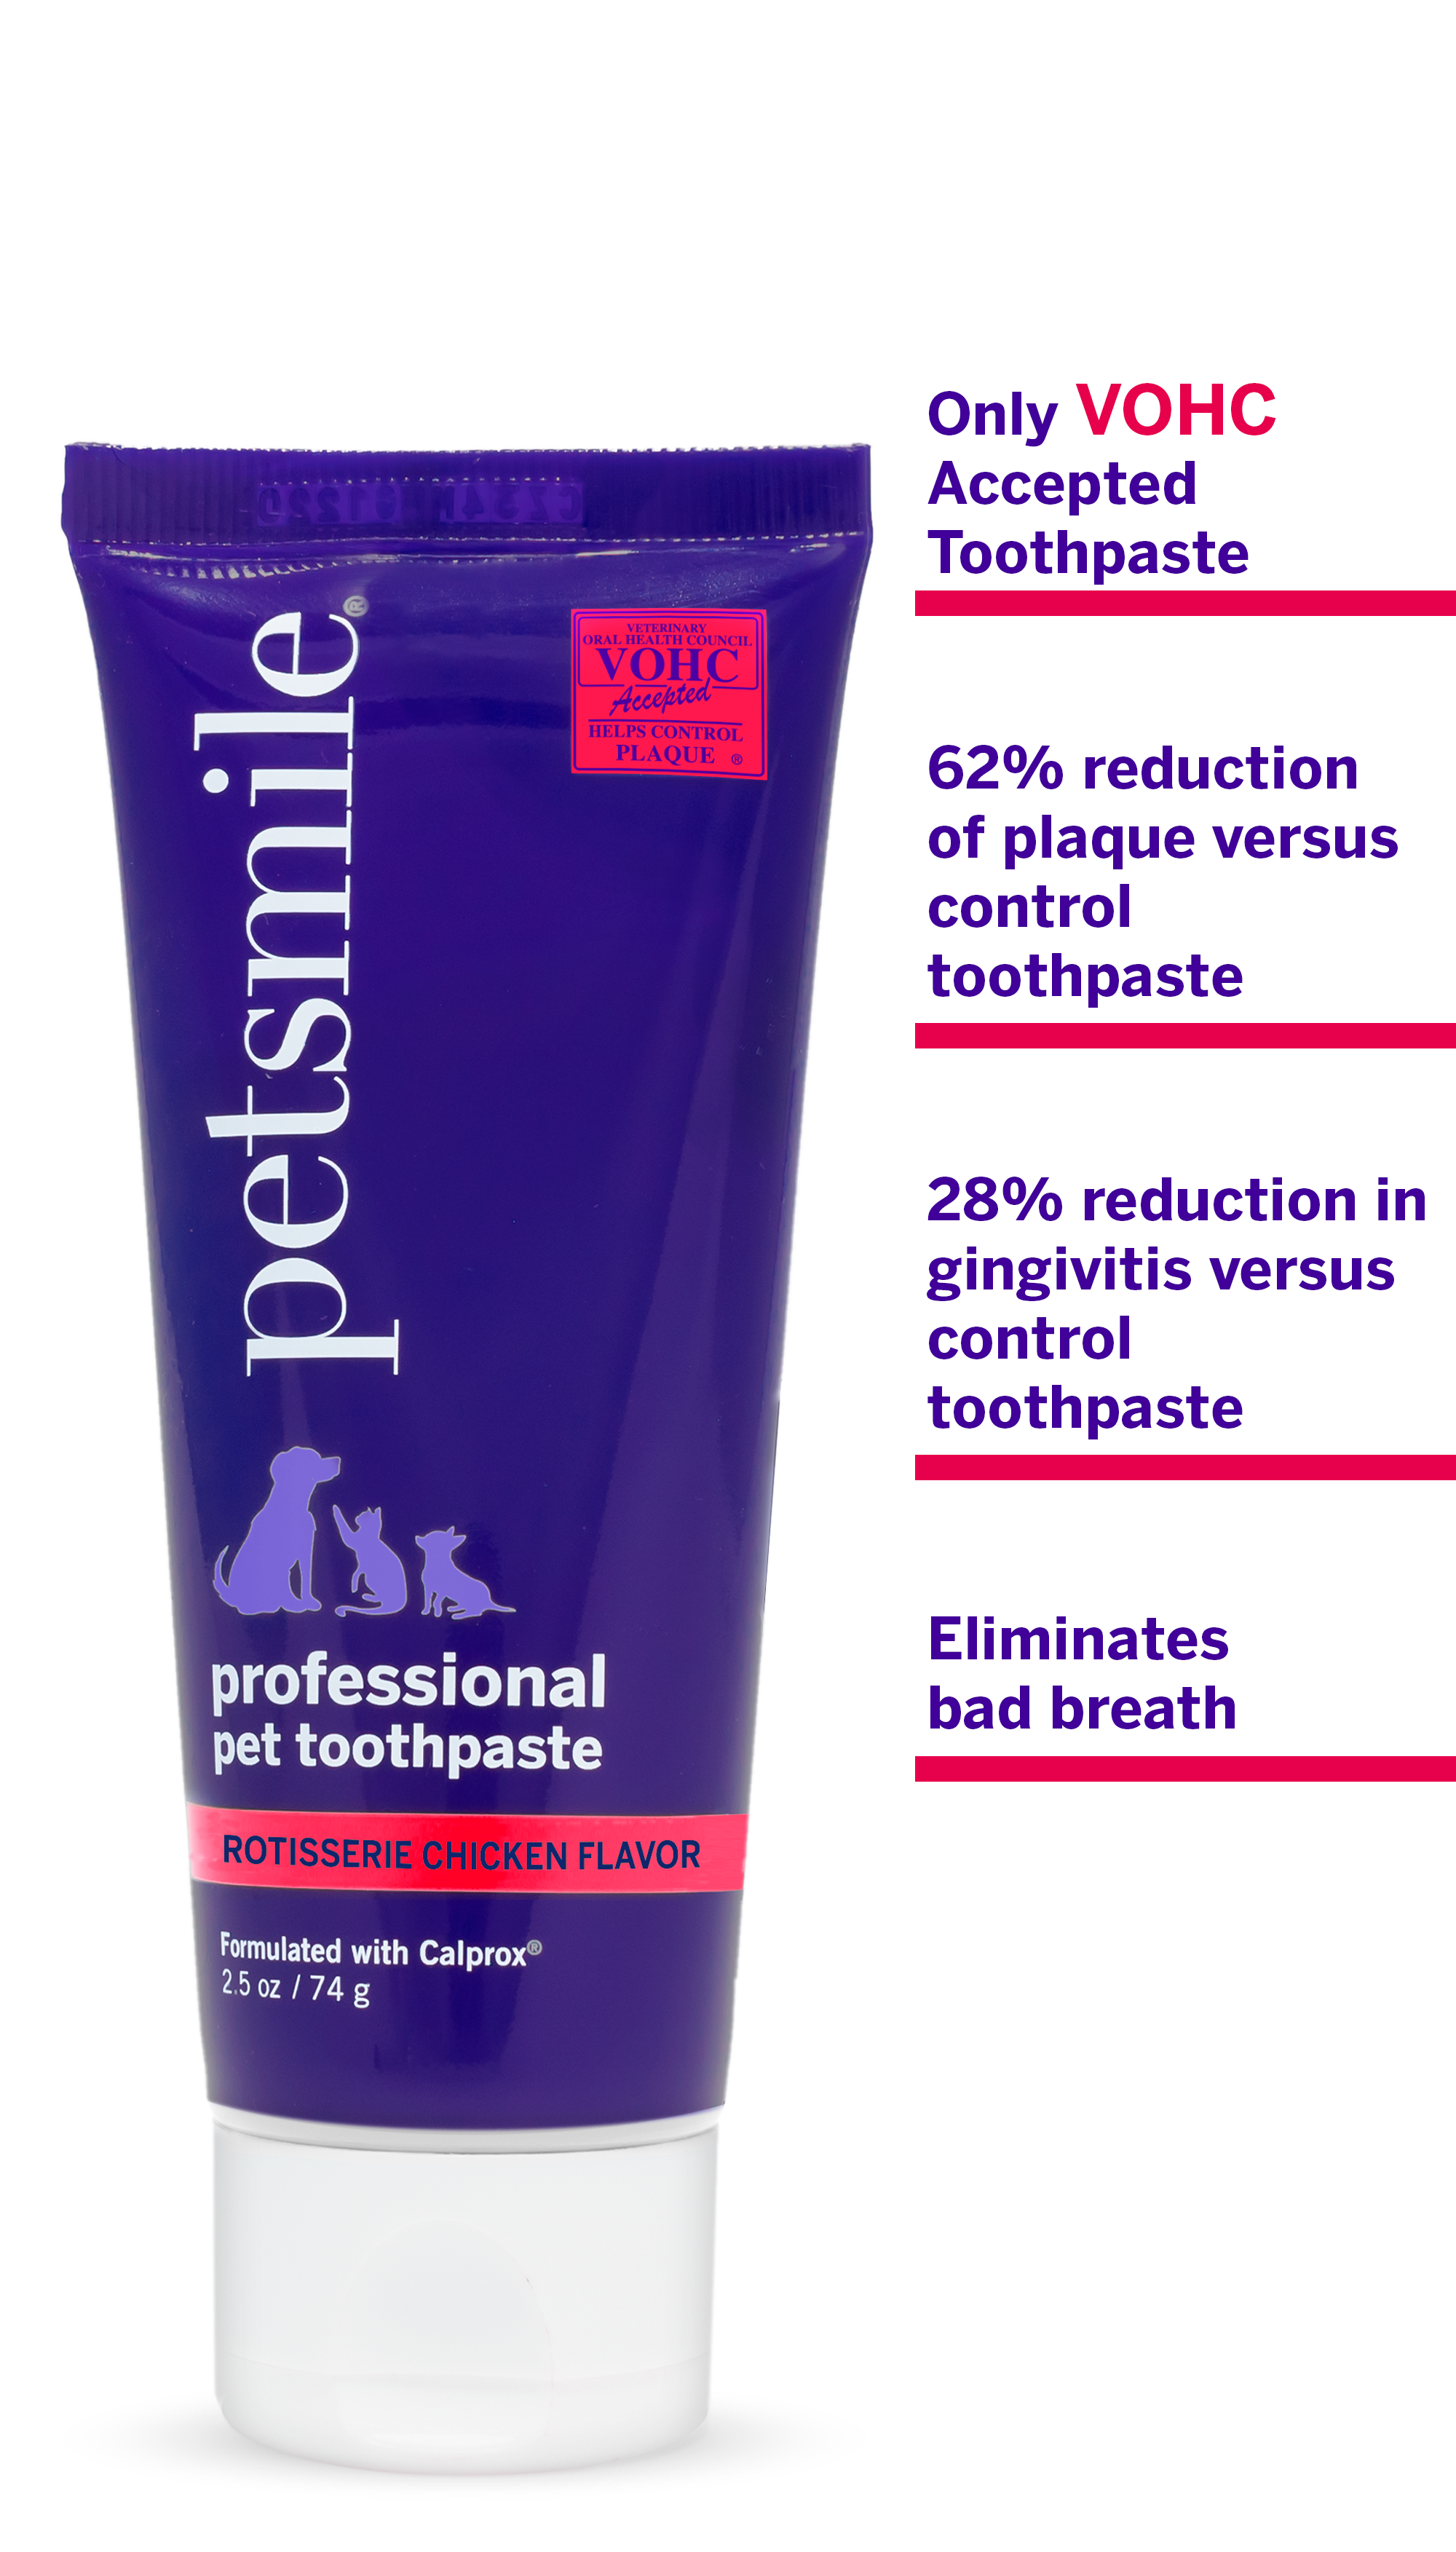 2.5 OZ of small cat toothapste , petsmile professional cat toothpaste with chicken flavor , Small tube of petsmile professional toothpaste for all cats , 62% greater in plaque reduction, 28% greater in gingivitis reduction , Clinically tested, superior results , Small tube, big results